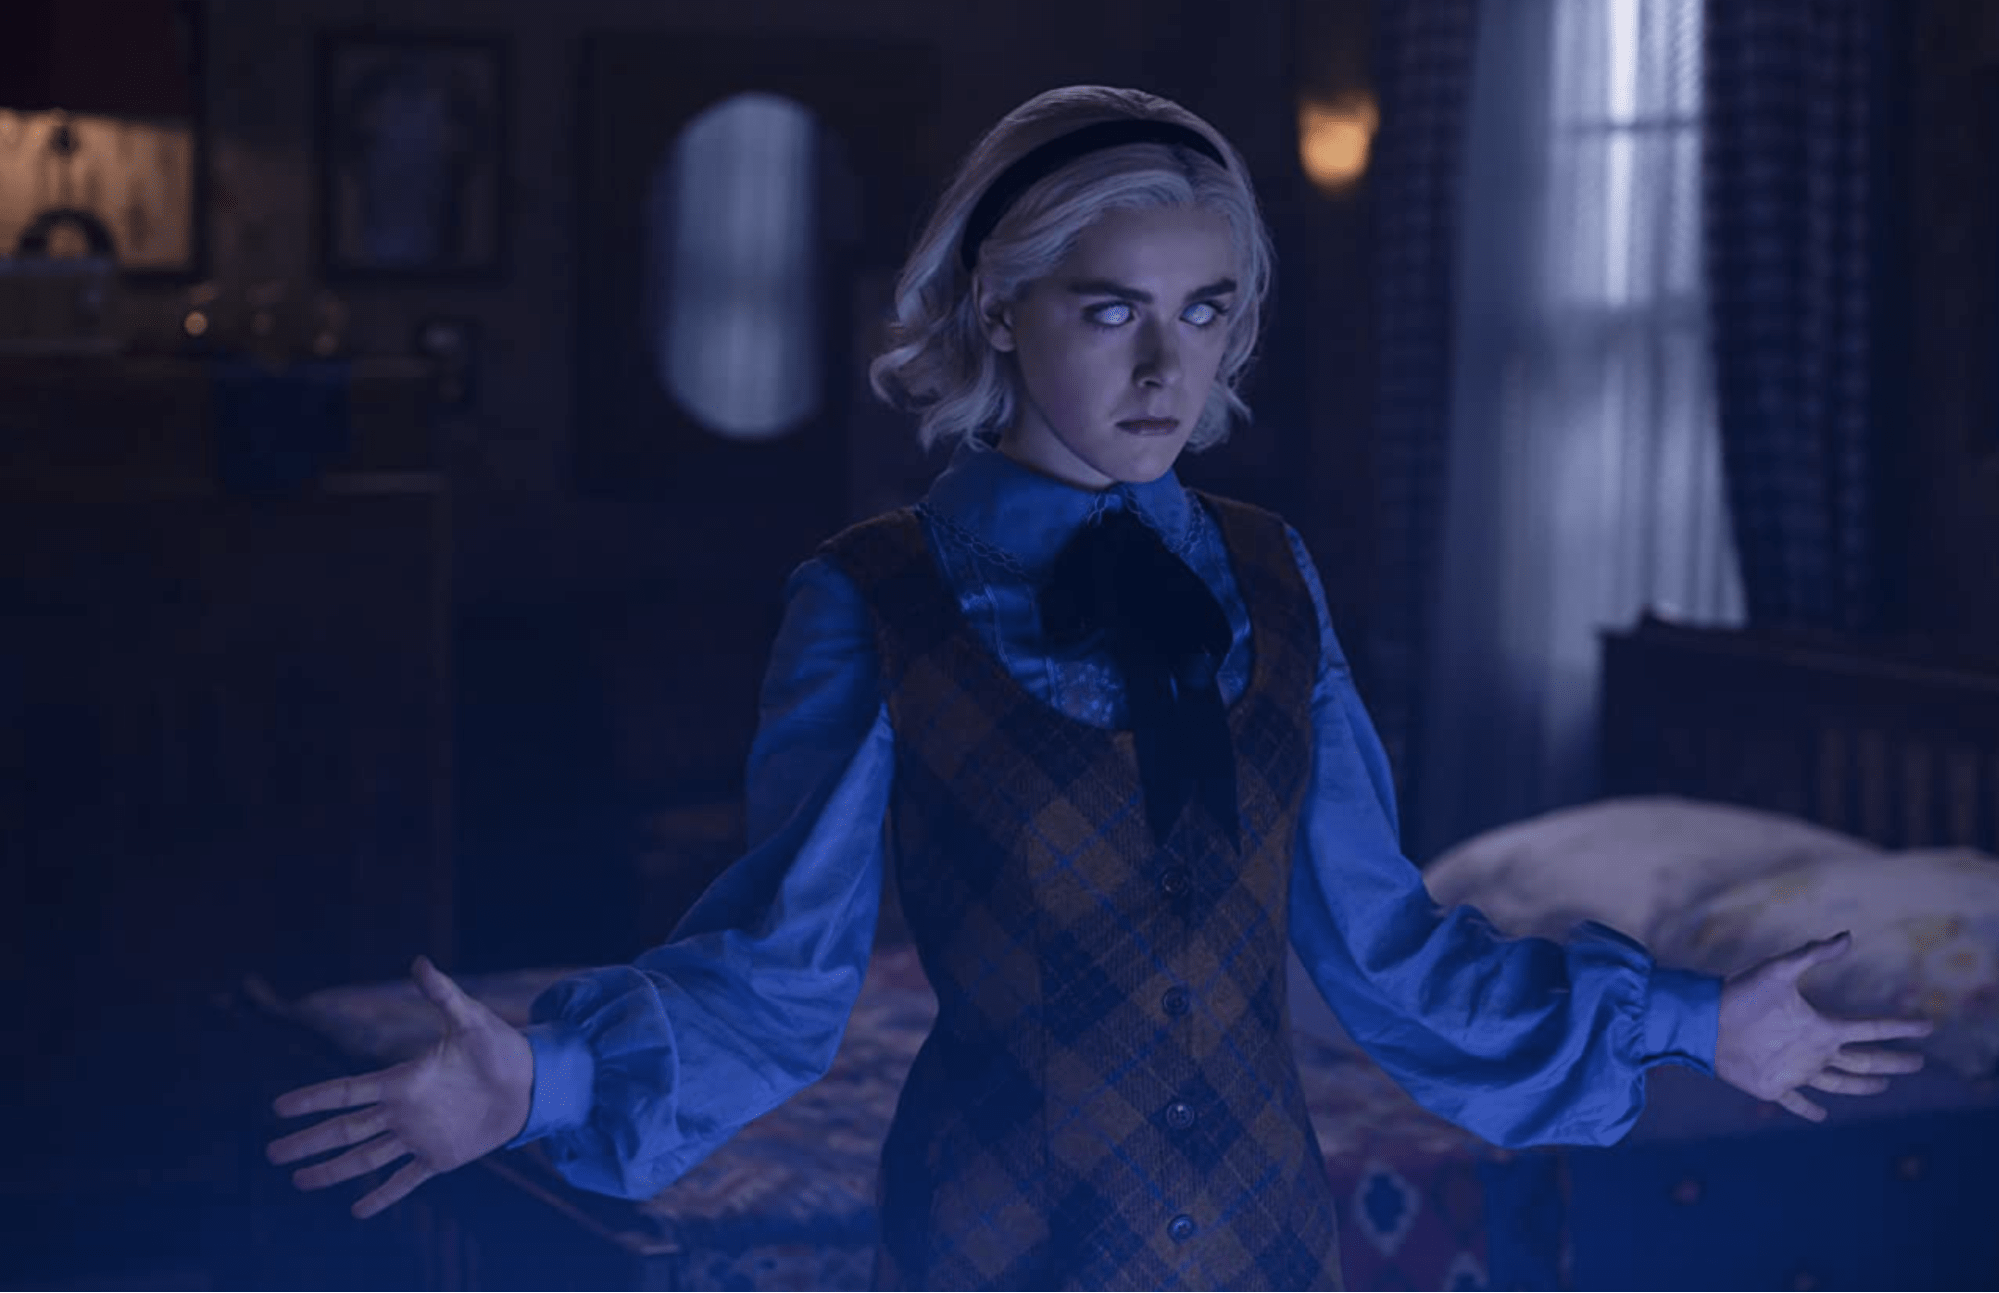 fourth and final season of chilling adventures of sabrina